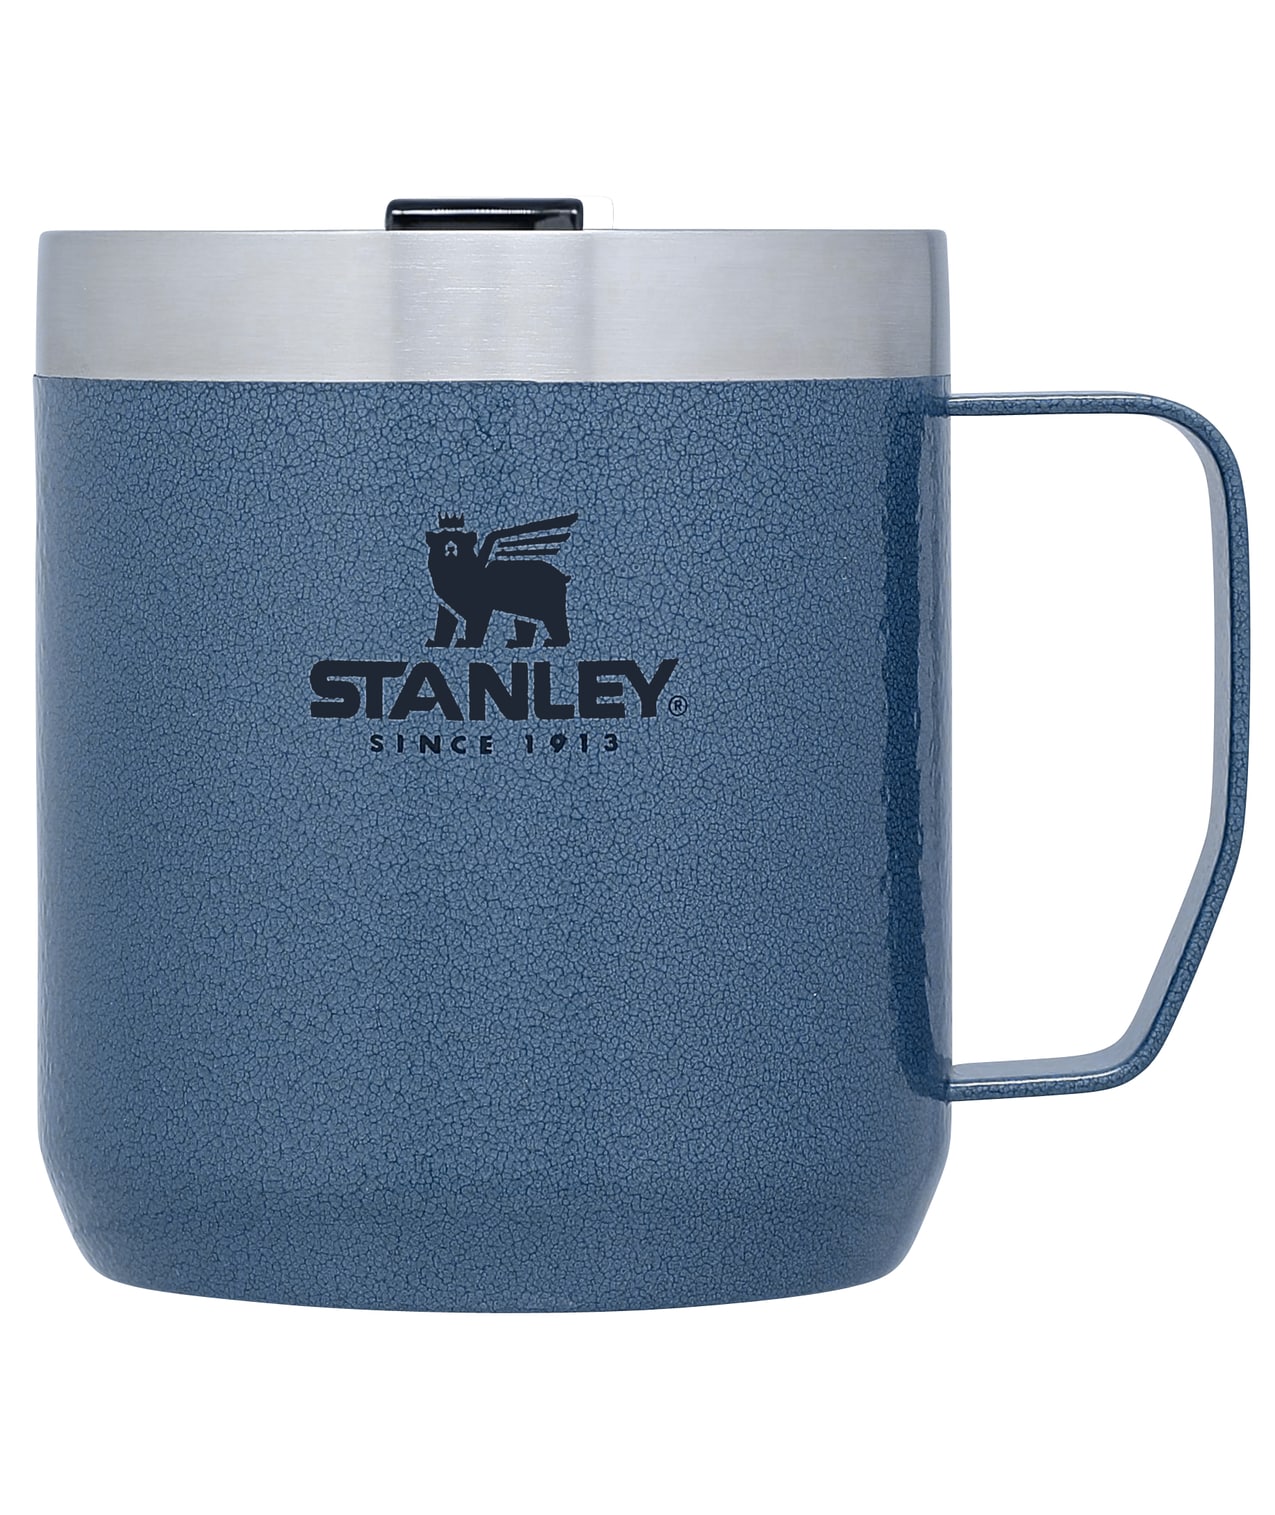 Stainless　the　Travel　Stanley　oz　department　Bottles　in　Steel　12-fl　Mugs　Insulated　Mug　Water　at